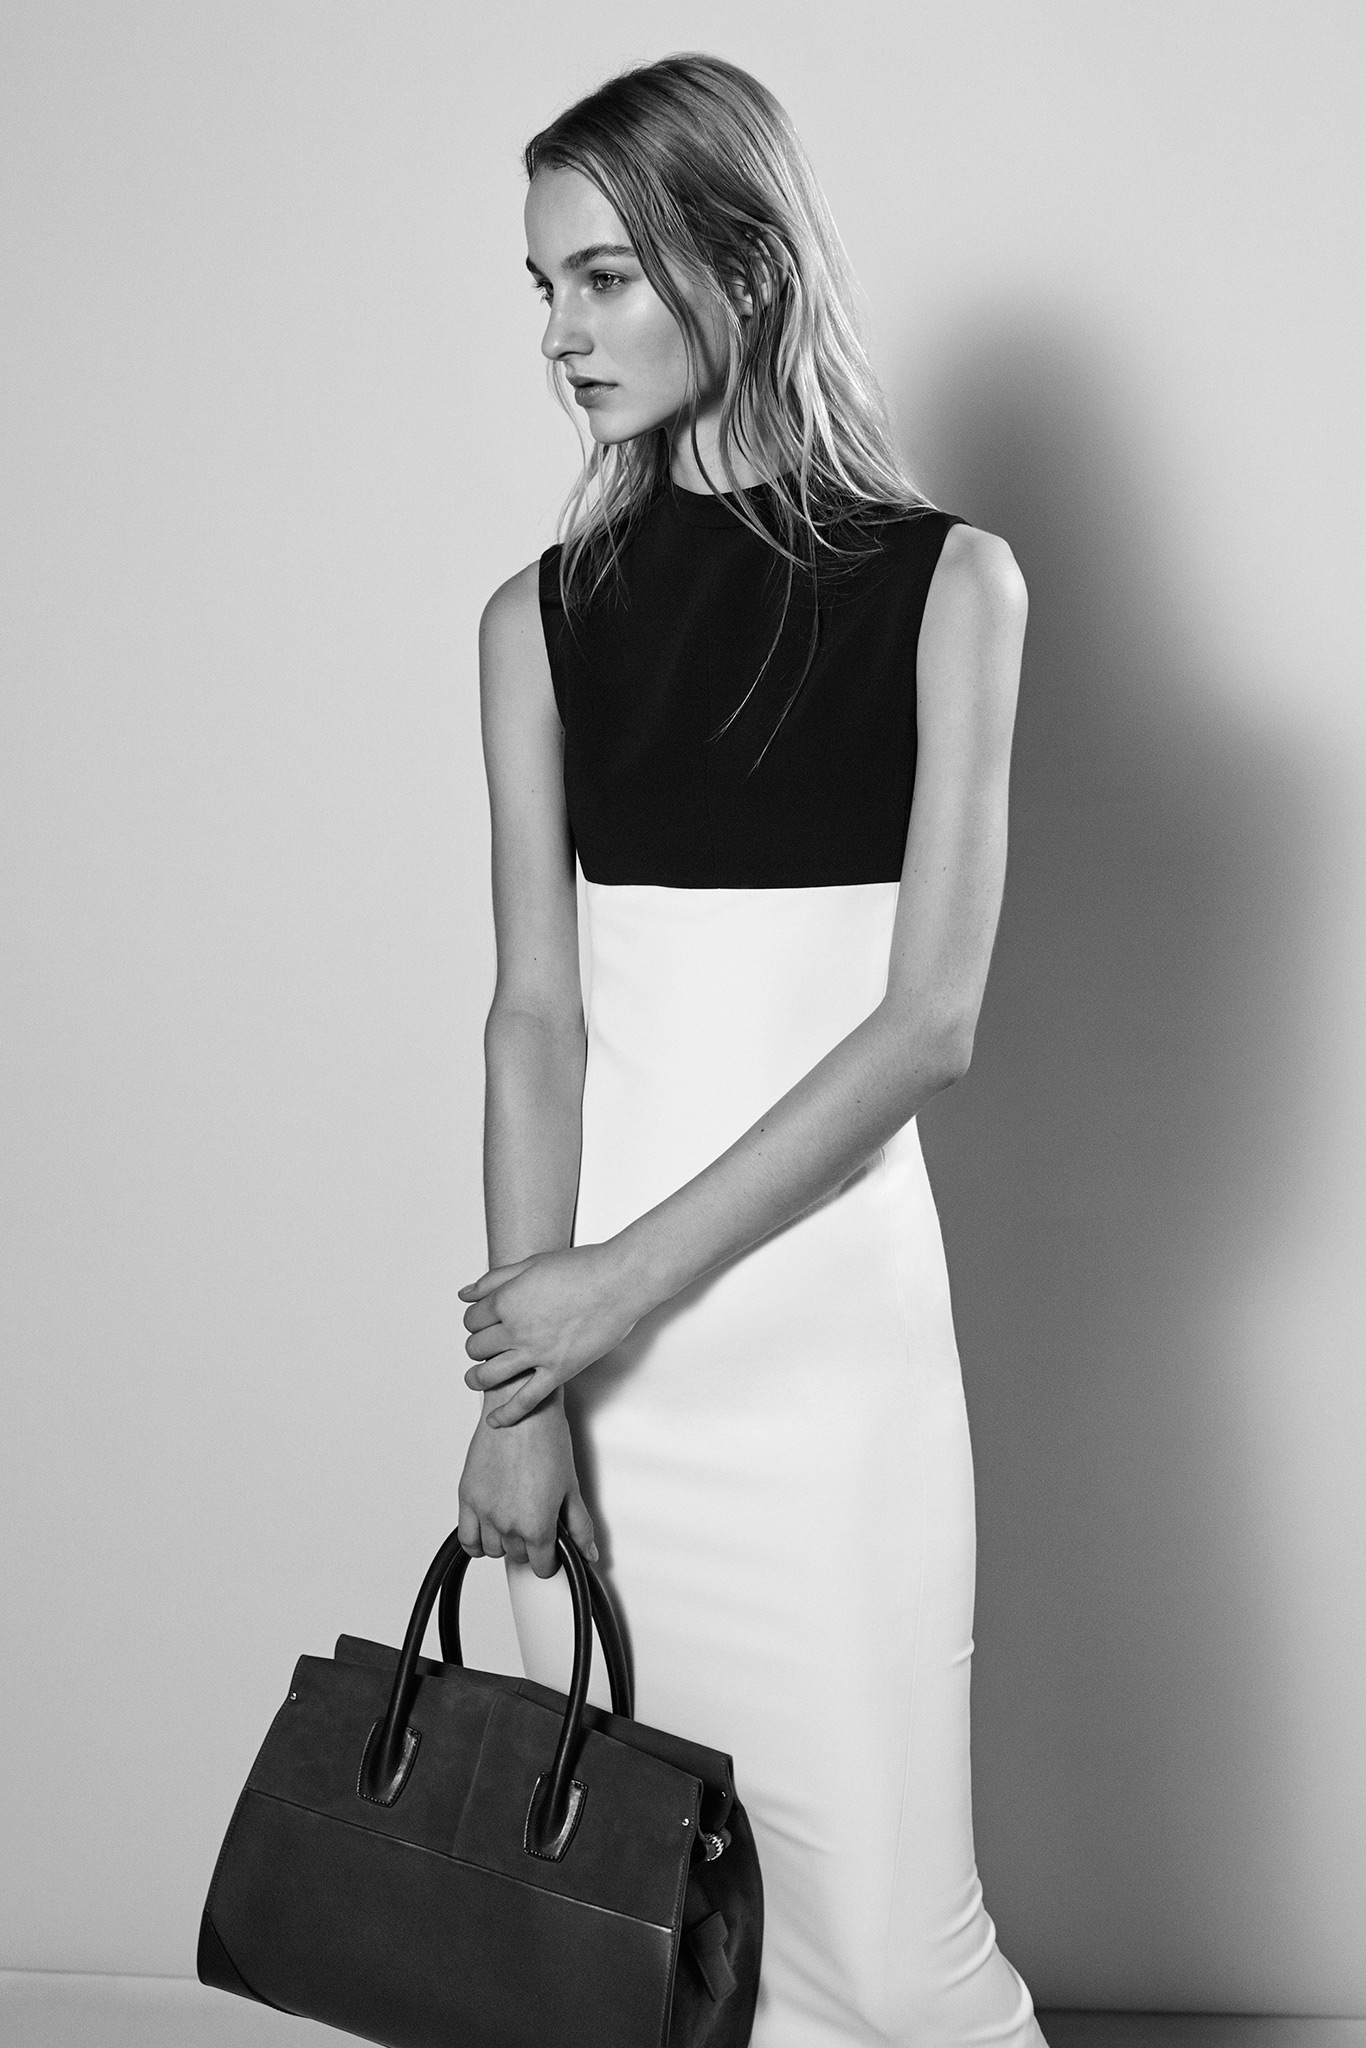 NARCISO RODRIGUEZ - PRE AUTUMN/WINTER 2015-16 READY-TO-WEAR